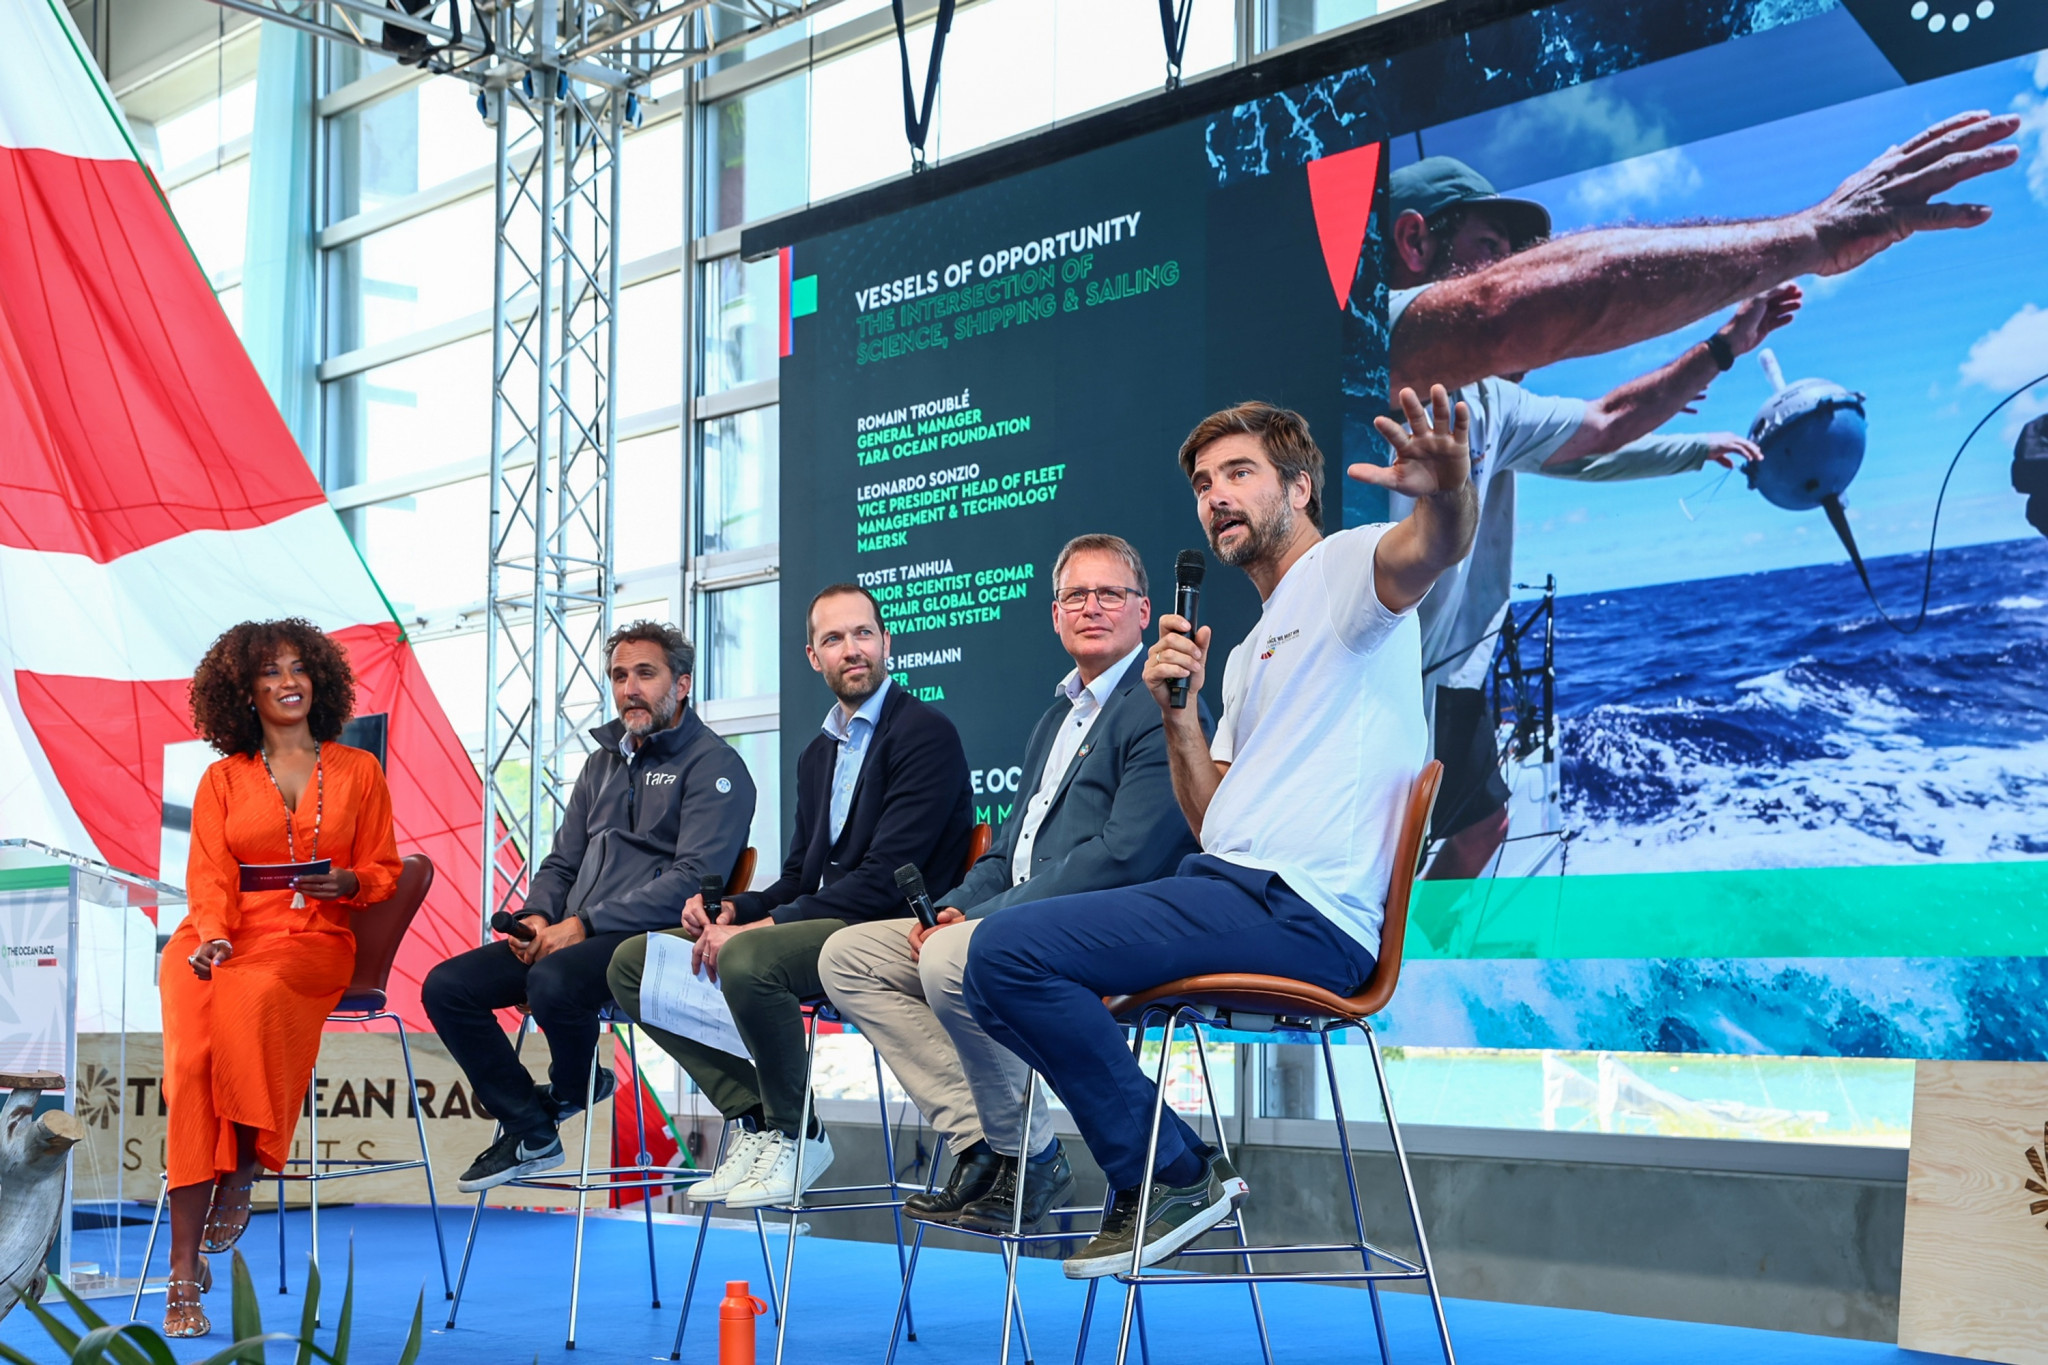 German sailor Boris Herrmann, right, was among the panellist at the event staged at Aarhus International Sailing Center ©Sailing Energy/The Ocean Race